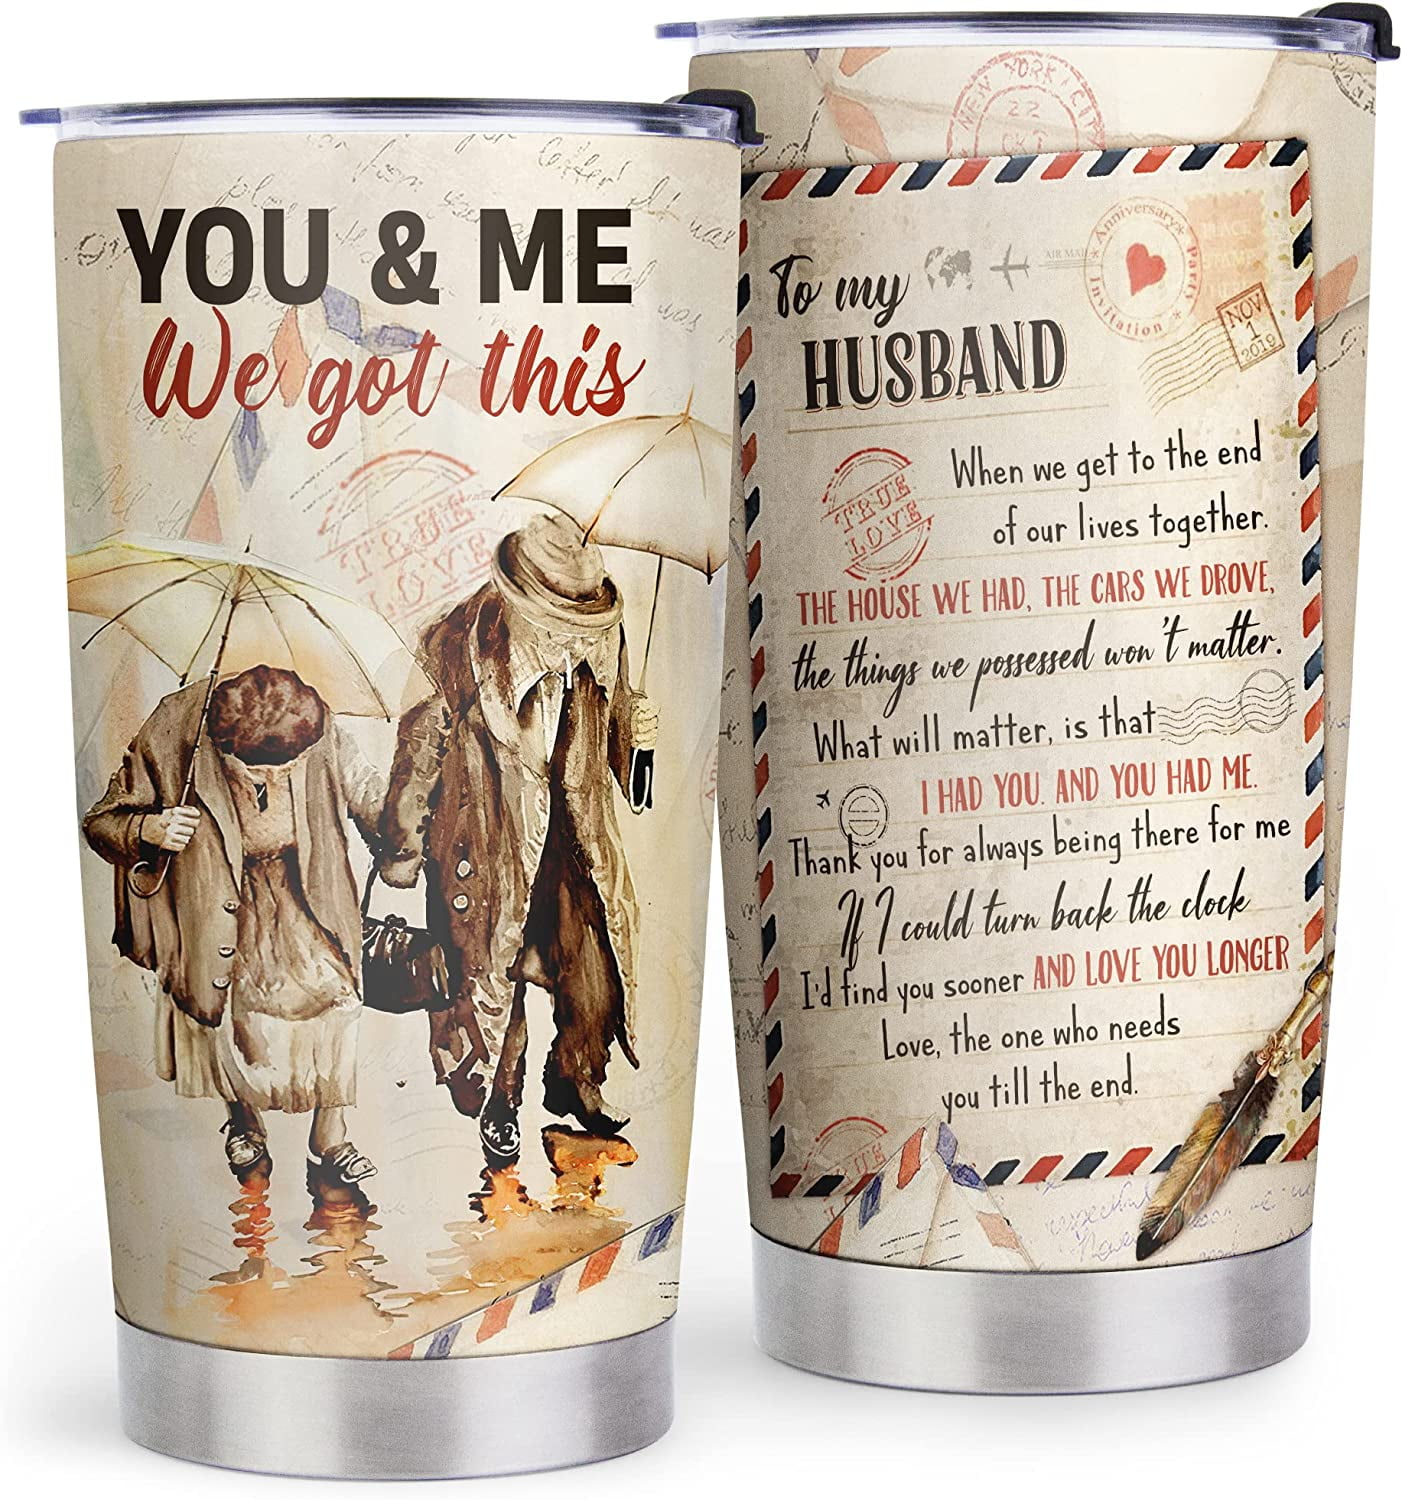 To My Husband - Gifts for Husband, Valentines Husband Gifts from Wife,  Husband Birthday Gift Ideas, Anniversary Fathers Day Husband Gifts, Husband  Tumbler for Coffee Work Car Travel 37455 37456